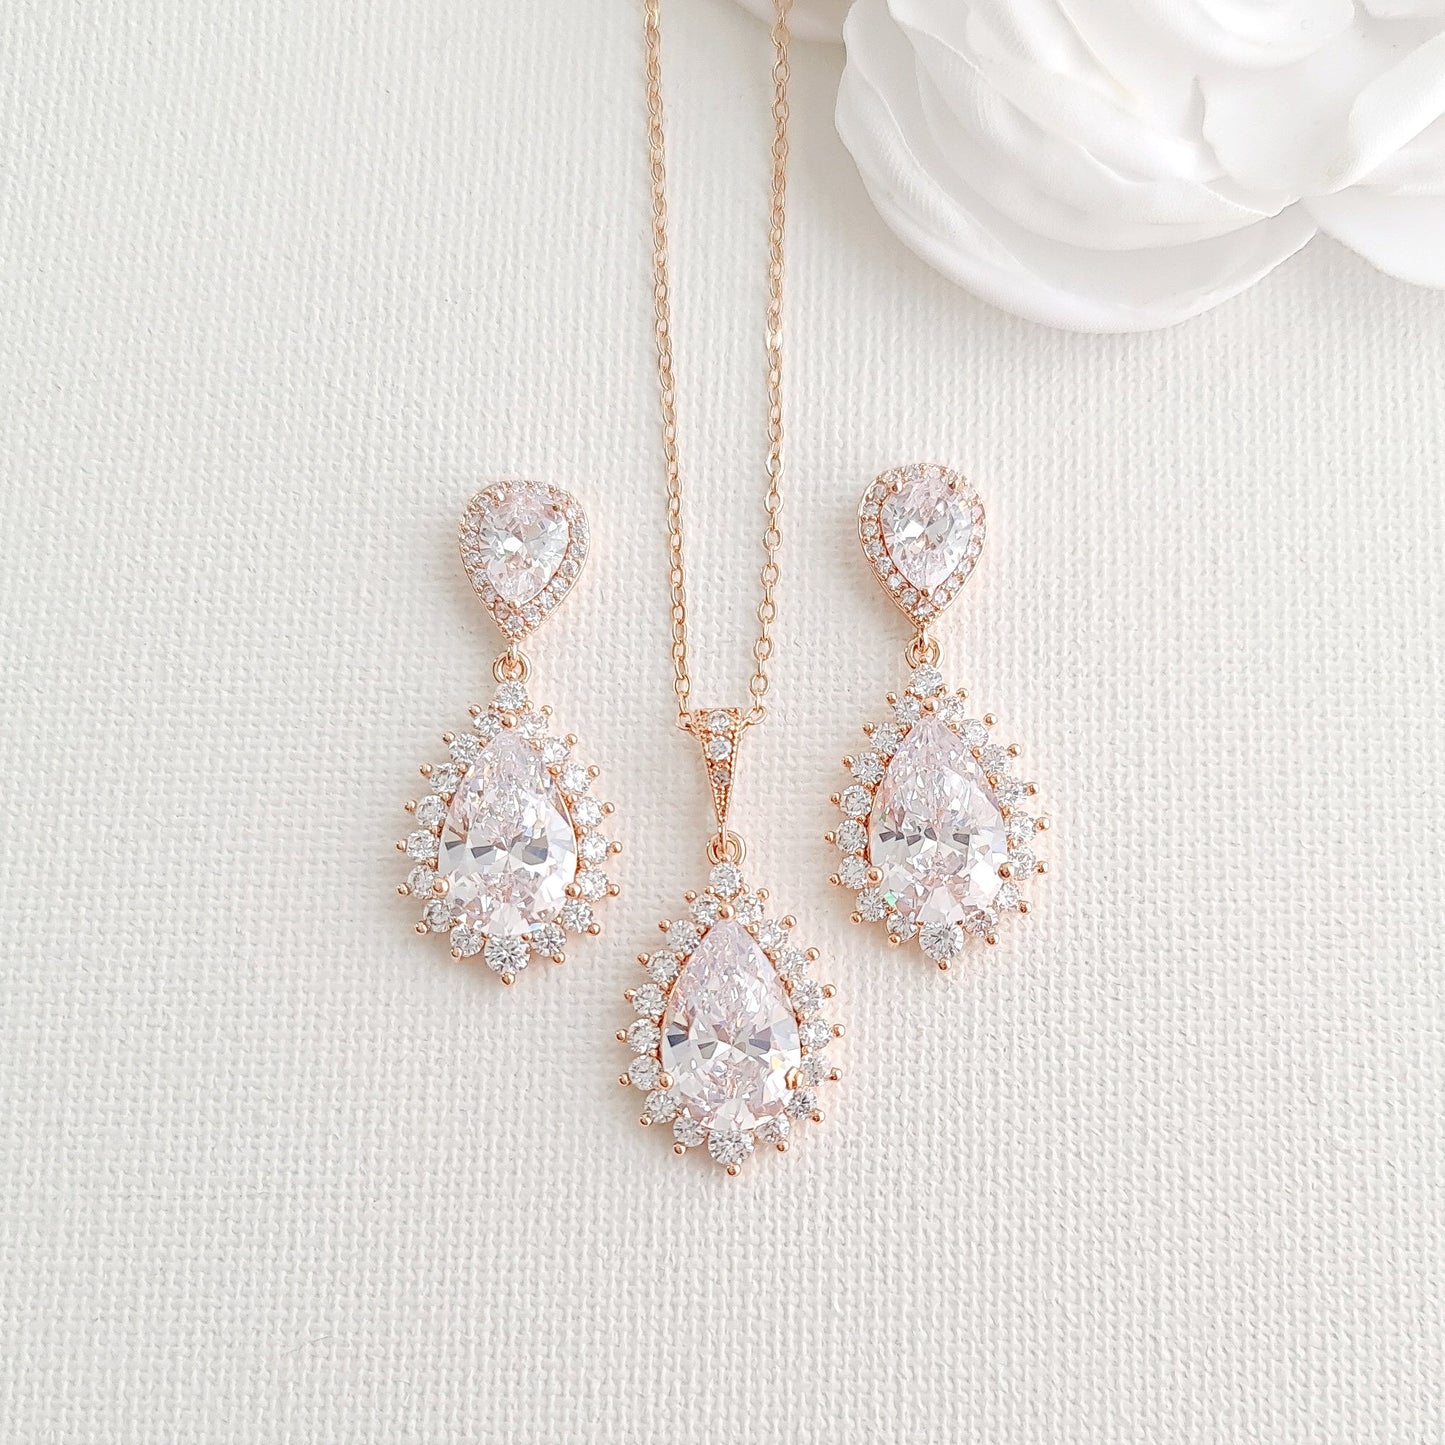 Rose Gold Earrings and necklace Set for brides